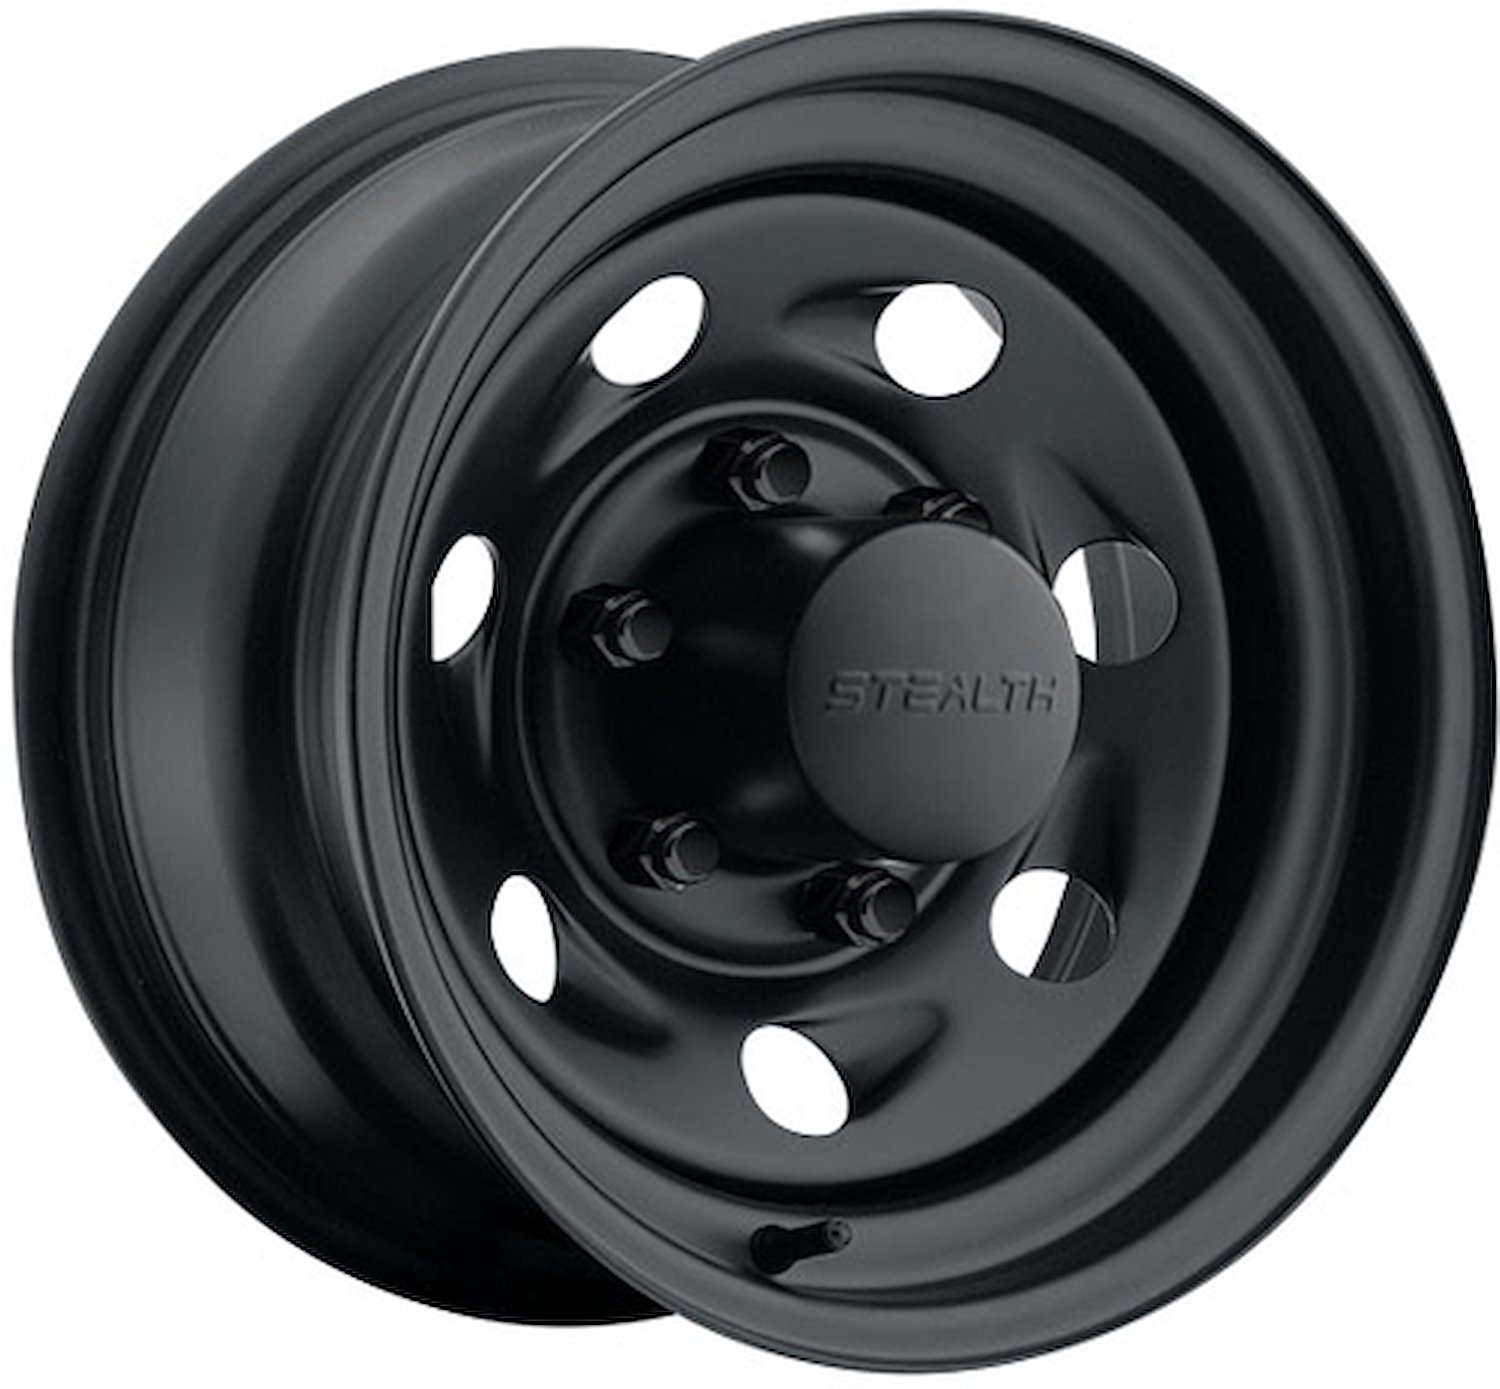 STEALTH BLACK VORTEC 16 x 10 6 x 55 Bolt Circle 4 Back Spacing 38 offset 428 Center Bore 2200 lbs Load Rating